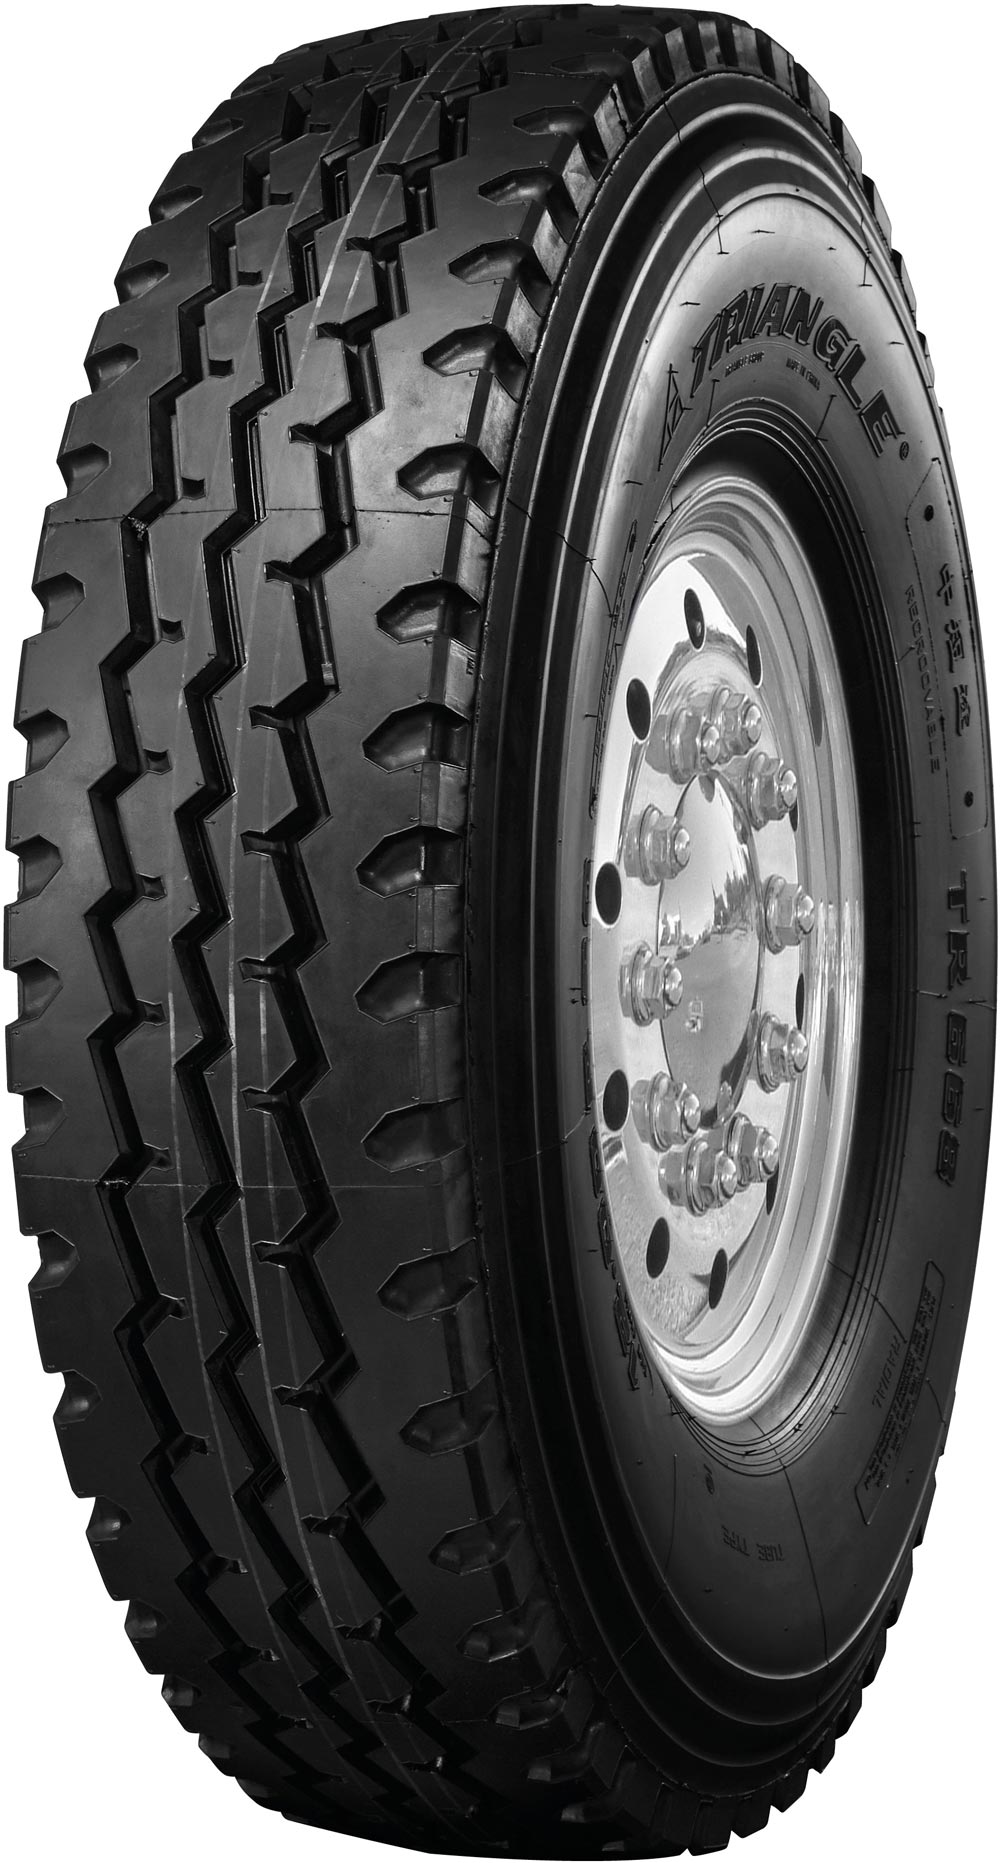 product_type-heavy_tires Triangle TR668 16PR 11 R22.5 146M